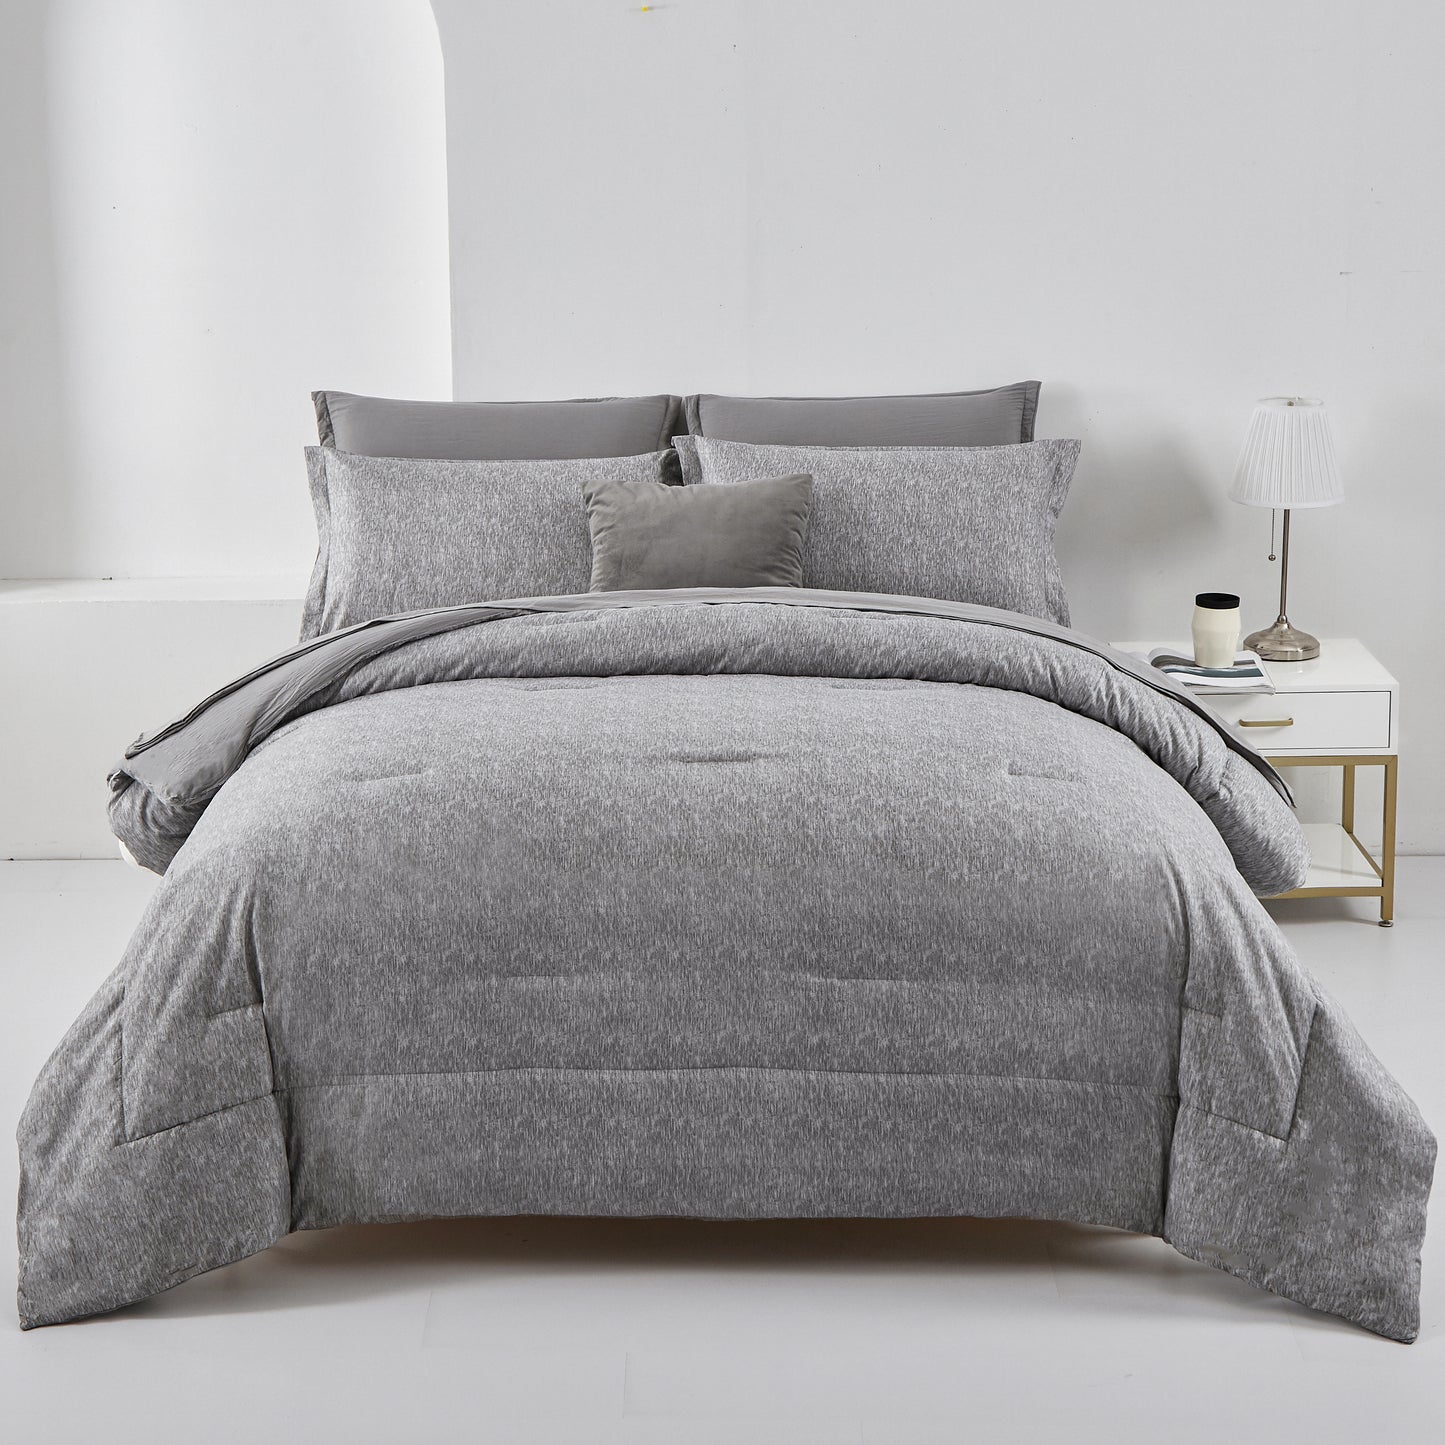 Wongs Bedding Grey Solid Color7 Pieces Comforter Set With 4 Pillows